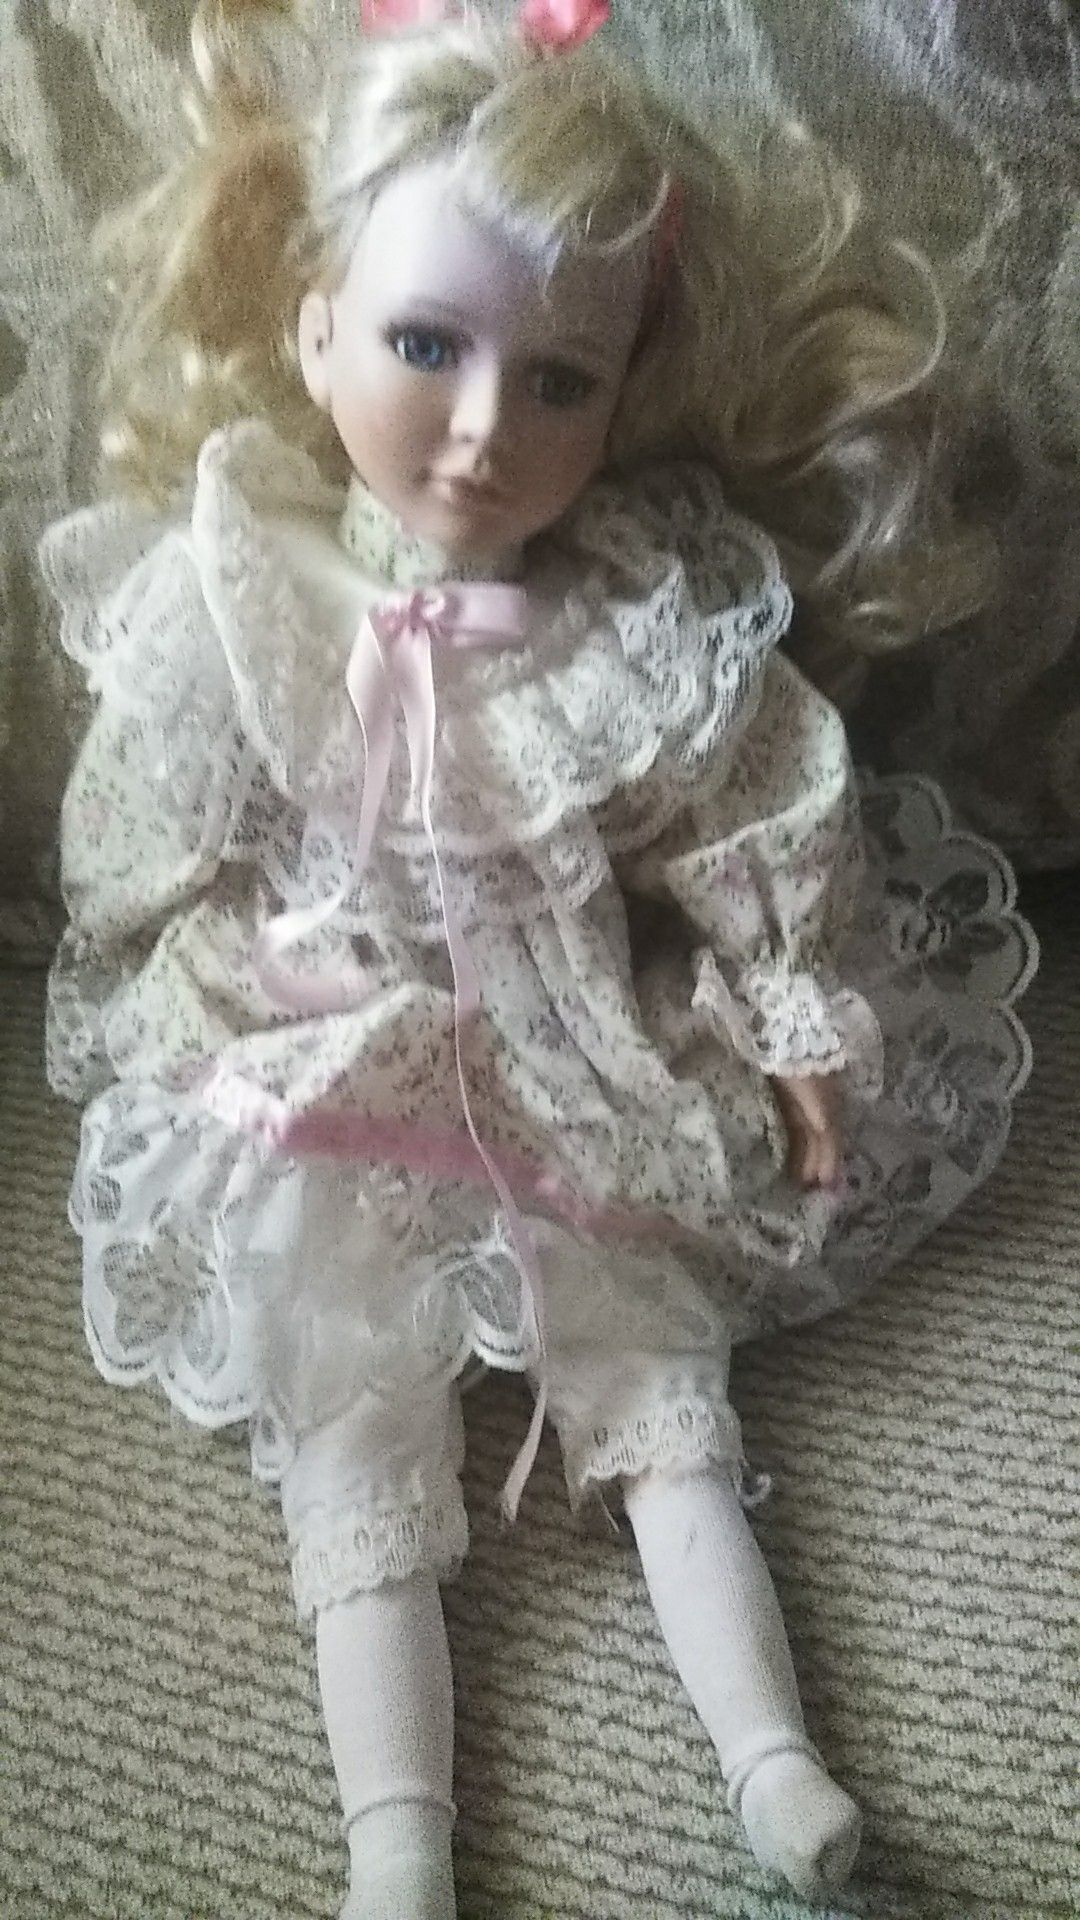 Of course Lynn antique doll